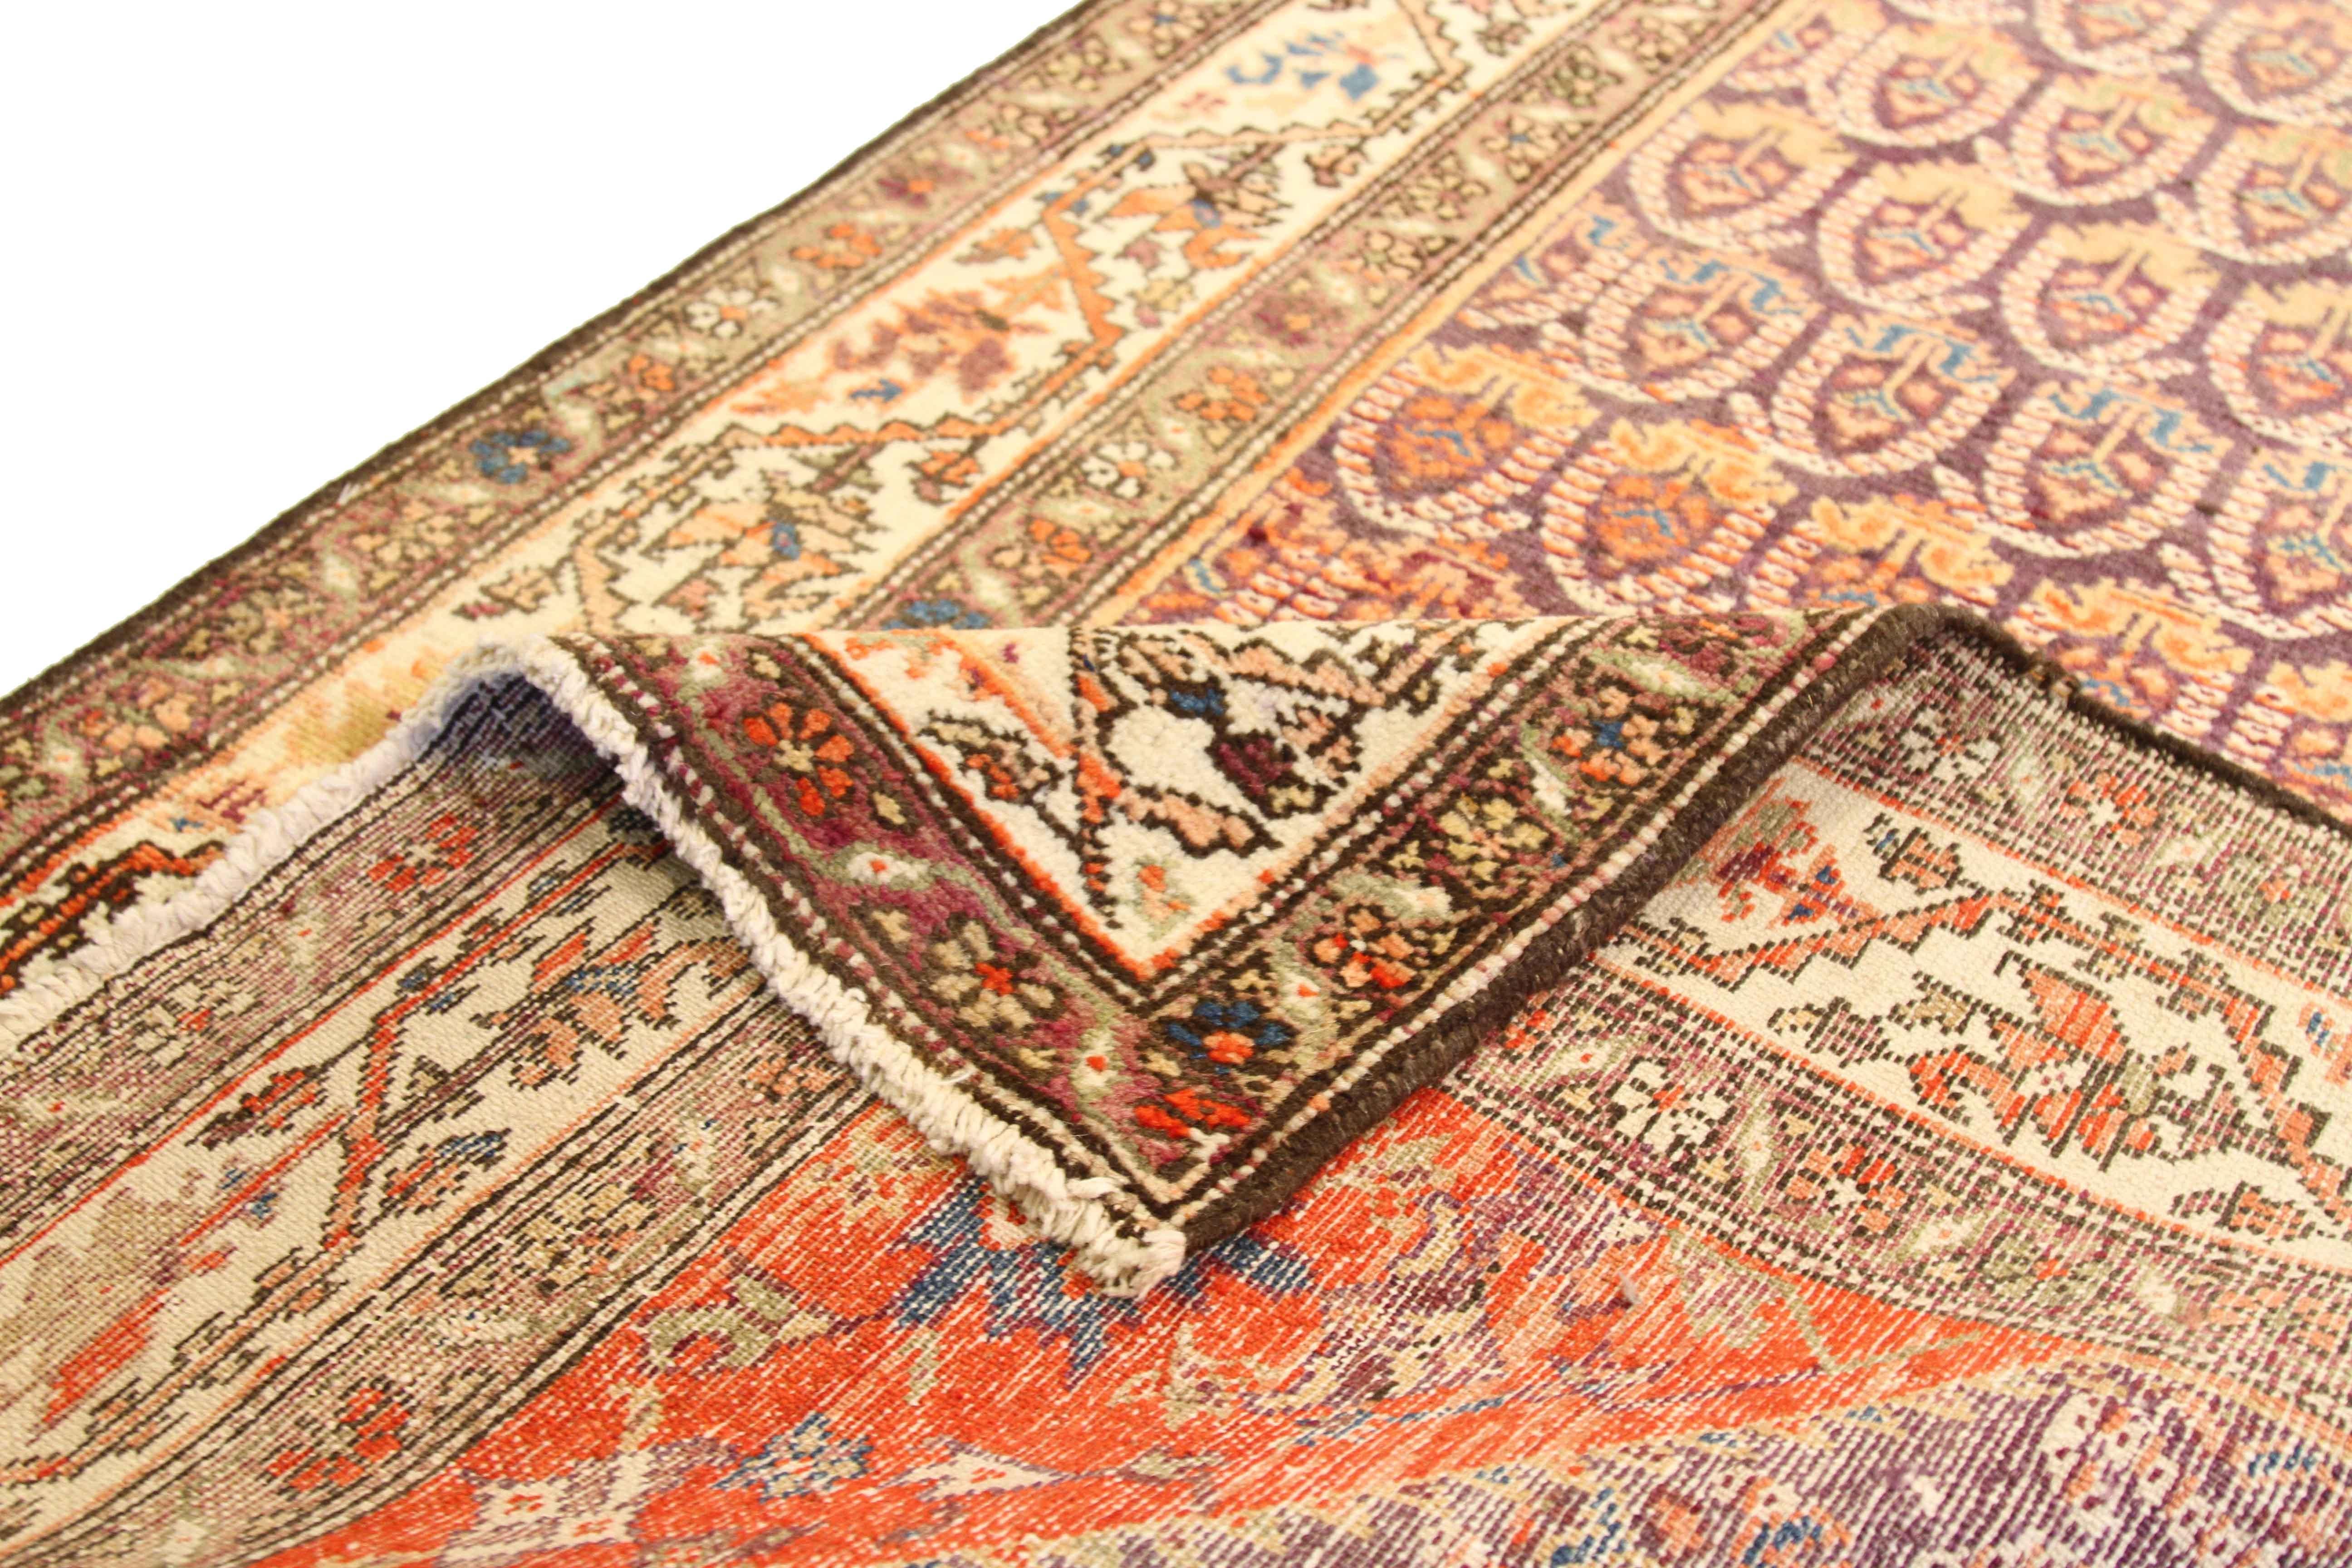 Made from handspun fine wool and organic vegetable dyes, this antique Persian rug features repeating patterns of traditional emblems reminiscent of ancient Persian royalty. The blend of majestic hues like purple, ivory, green, and red make it an